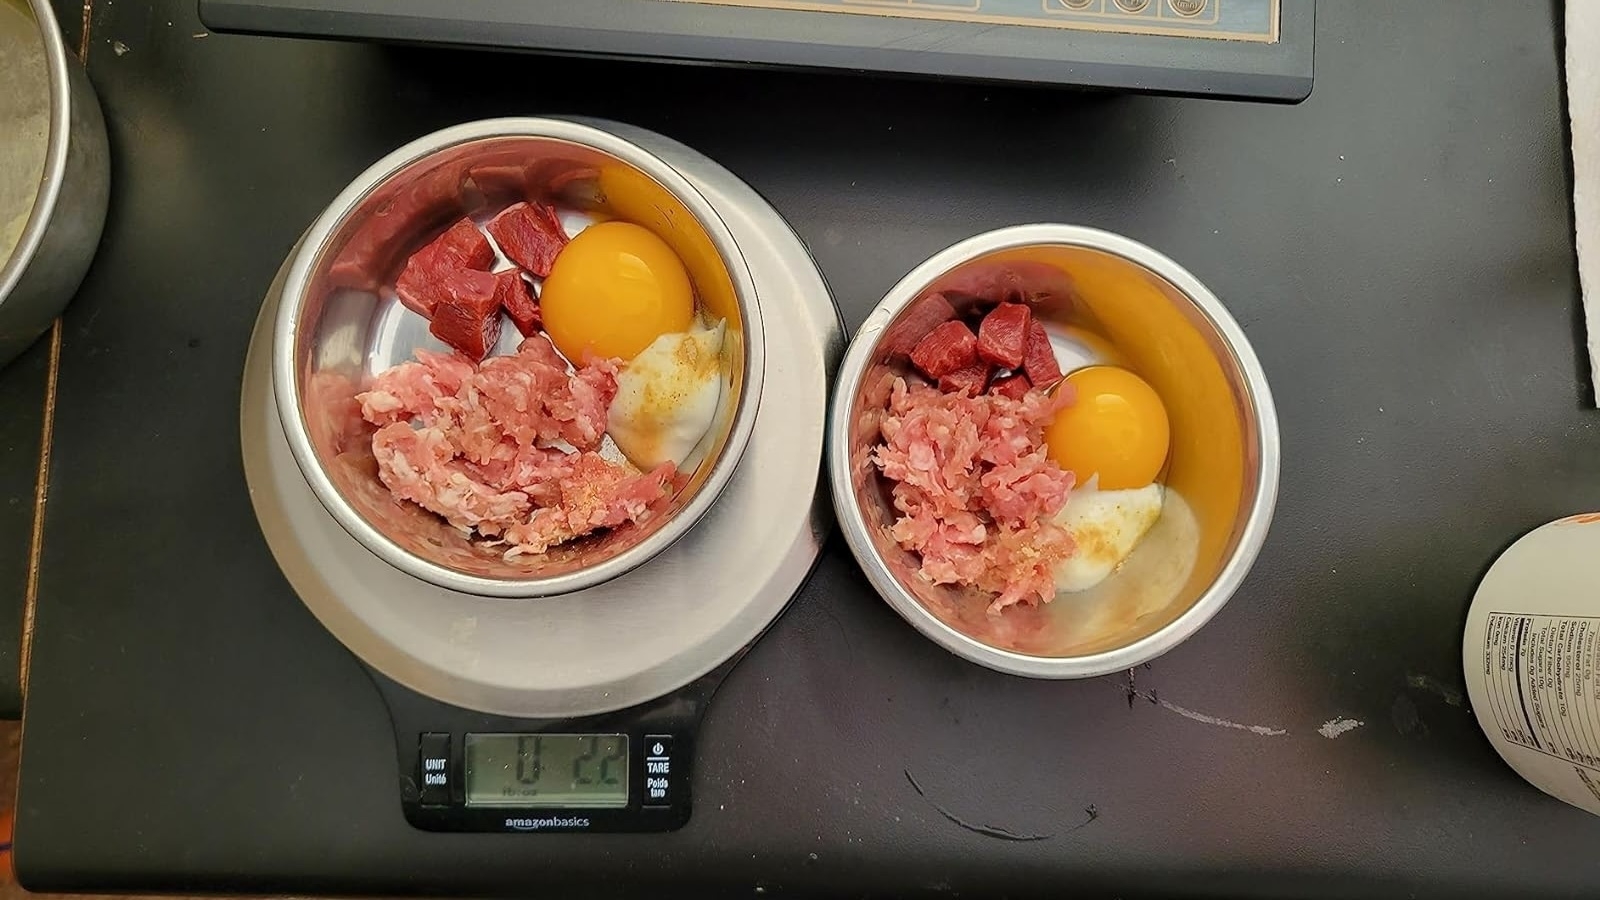 Reviewer image of meat and eggs portioned out in bowls and one on the scale